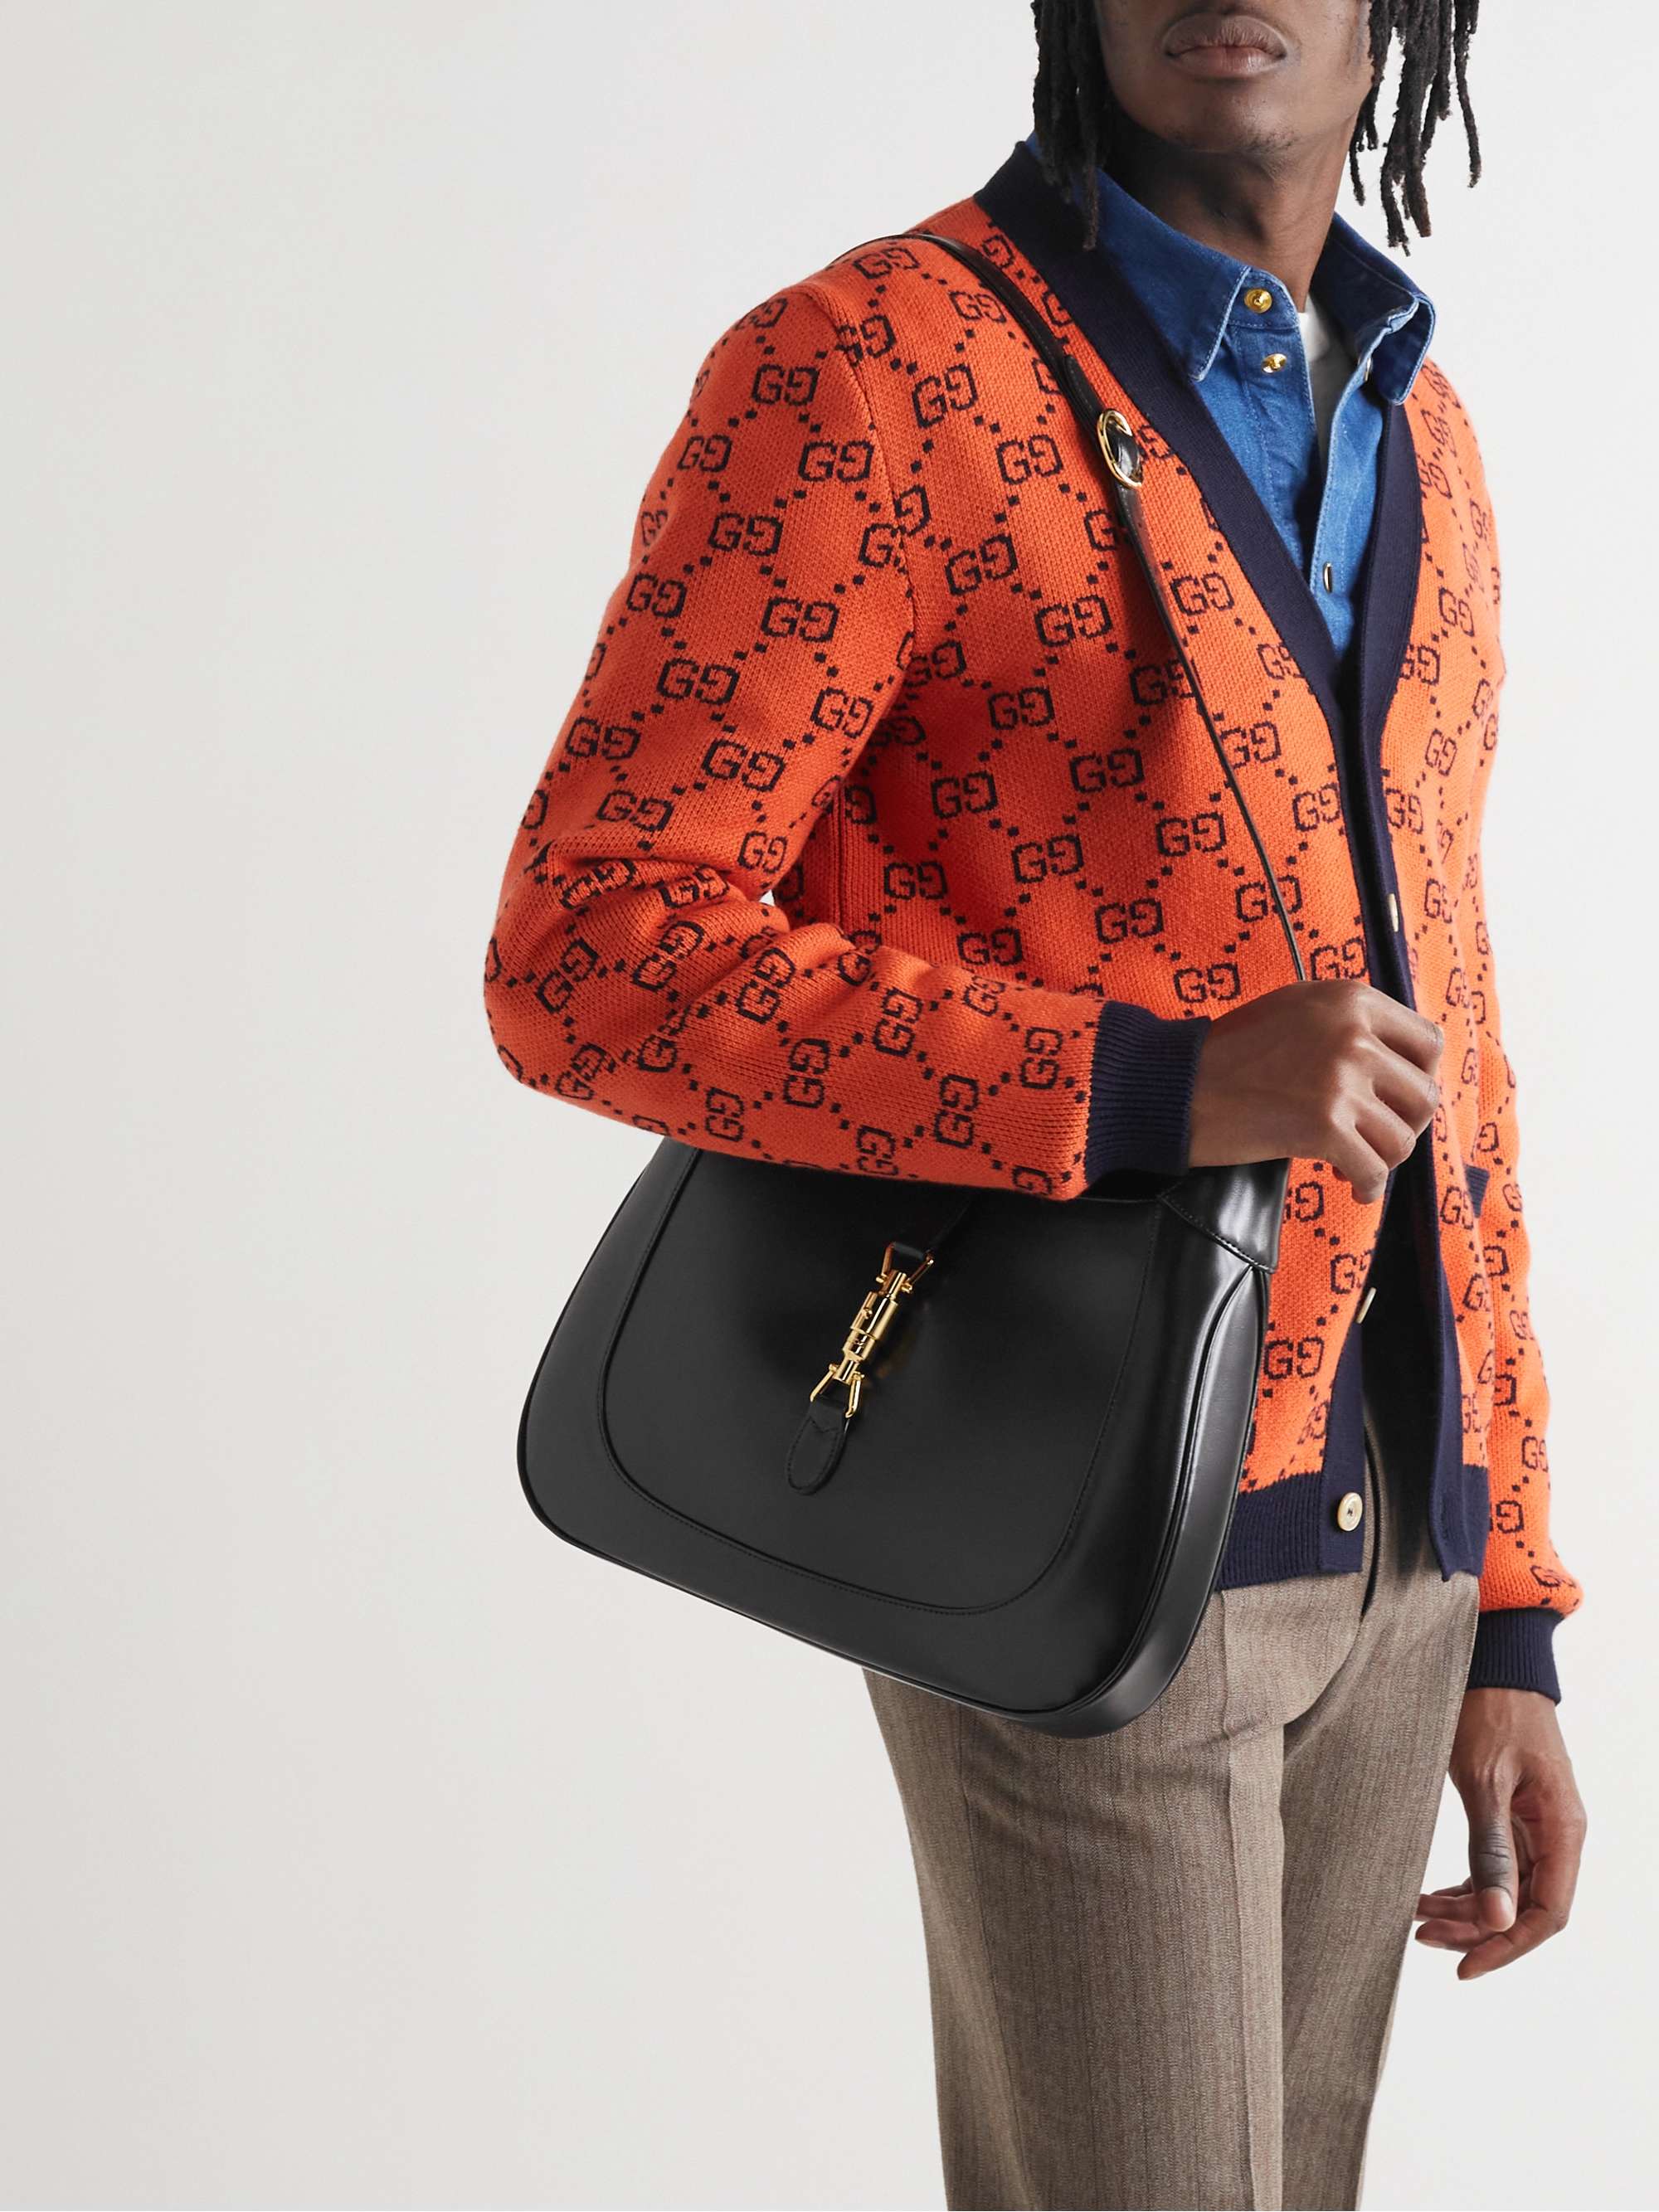 The Gucci Jackie Bag is Tailor Made for Modern Men - Men's Folio